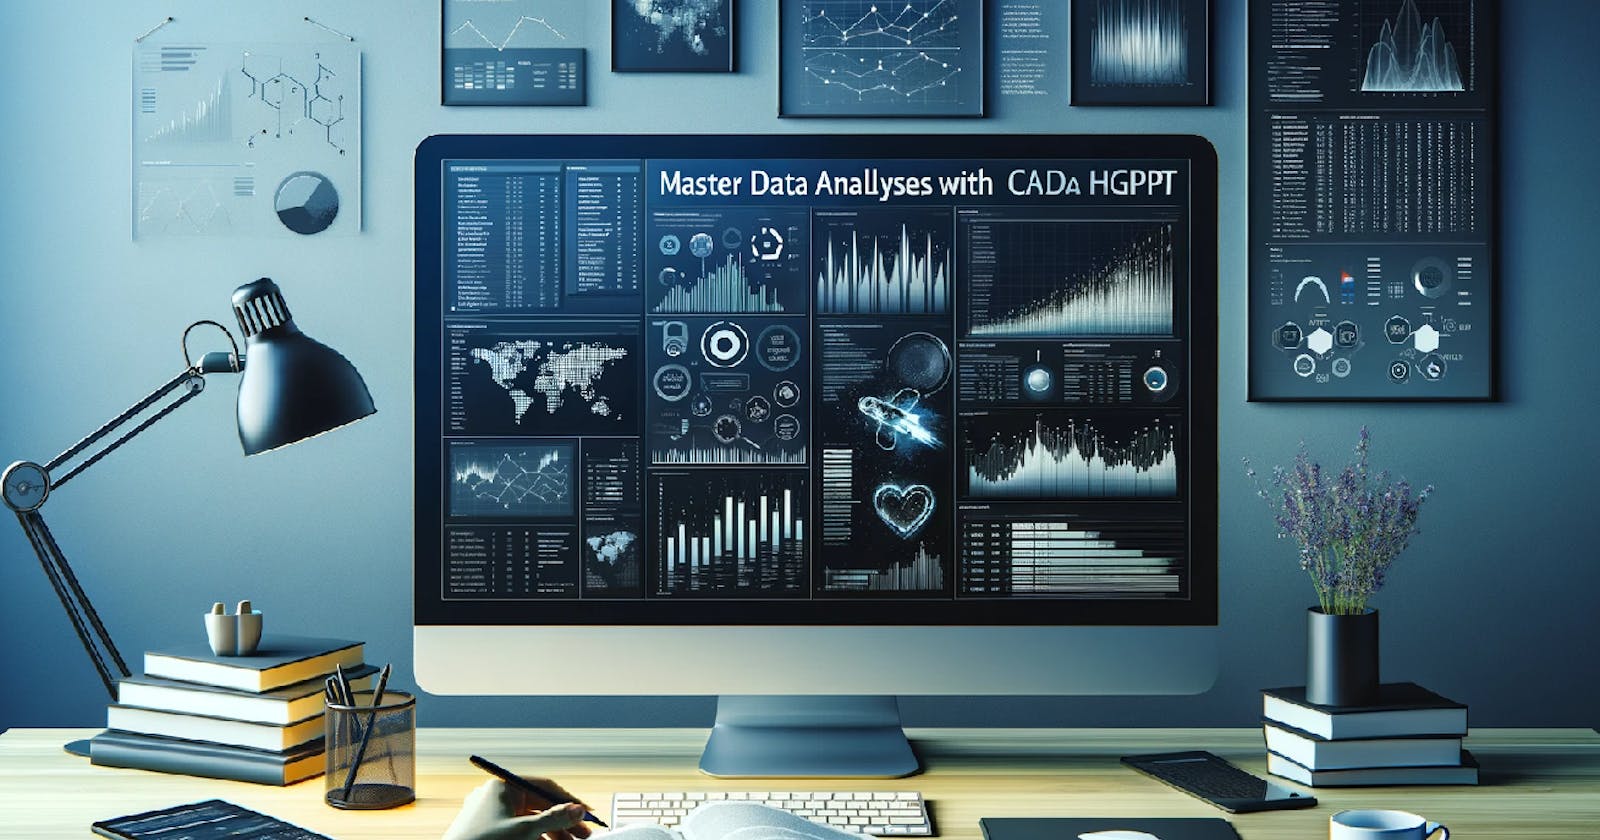 How to Analyze Anything - Master Data Analysis with ChatGPT (Beginners Guide)